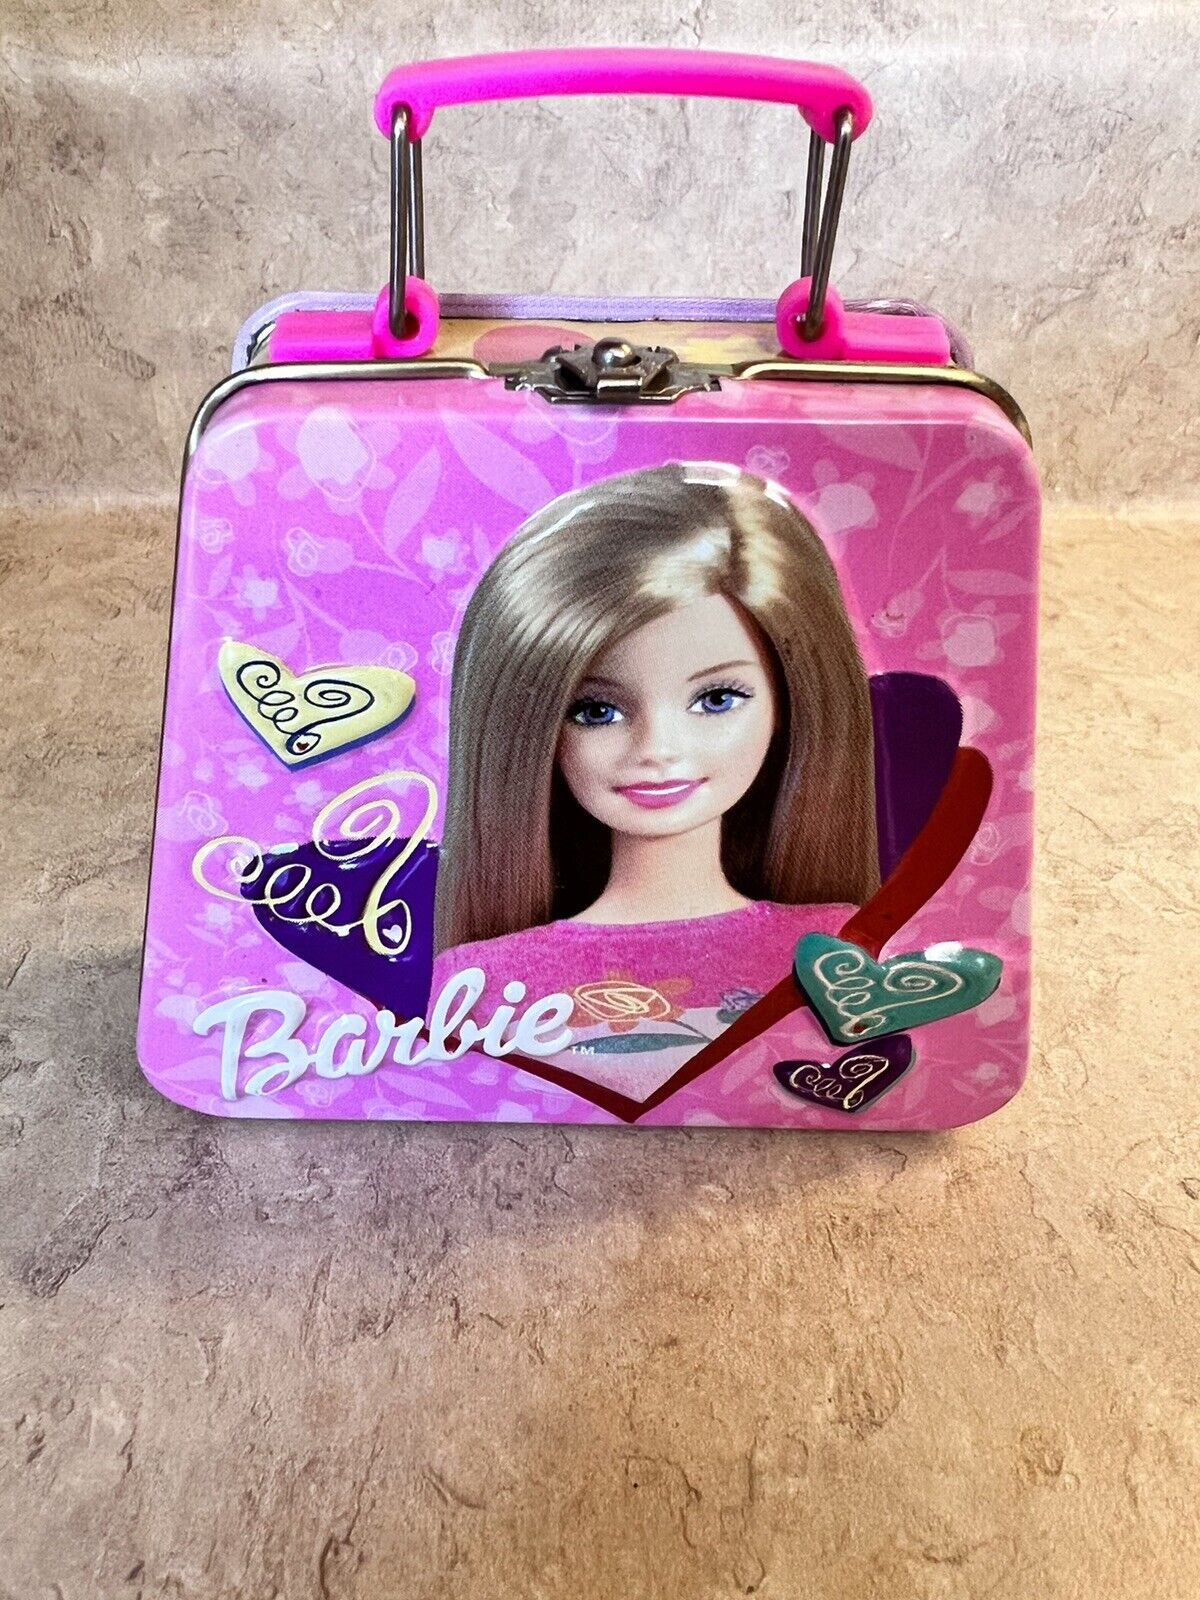 Vintage 2003 Hard to Find Barbie Mini Tin Candy Suitcase Lunchbox Collectible